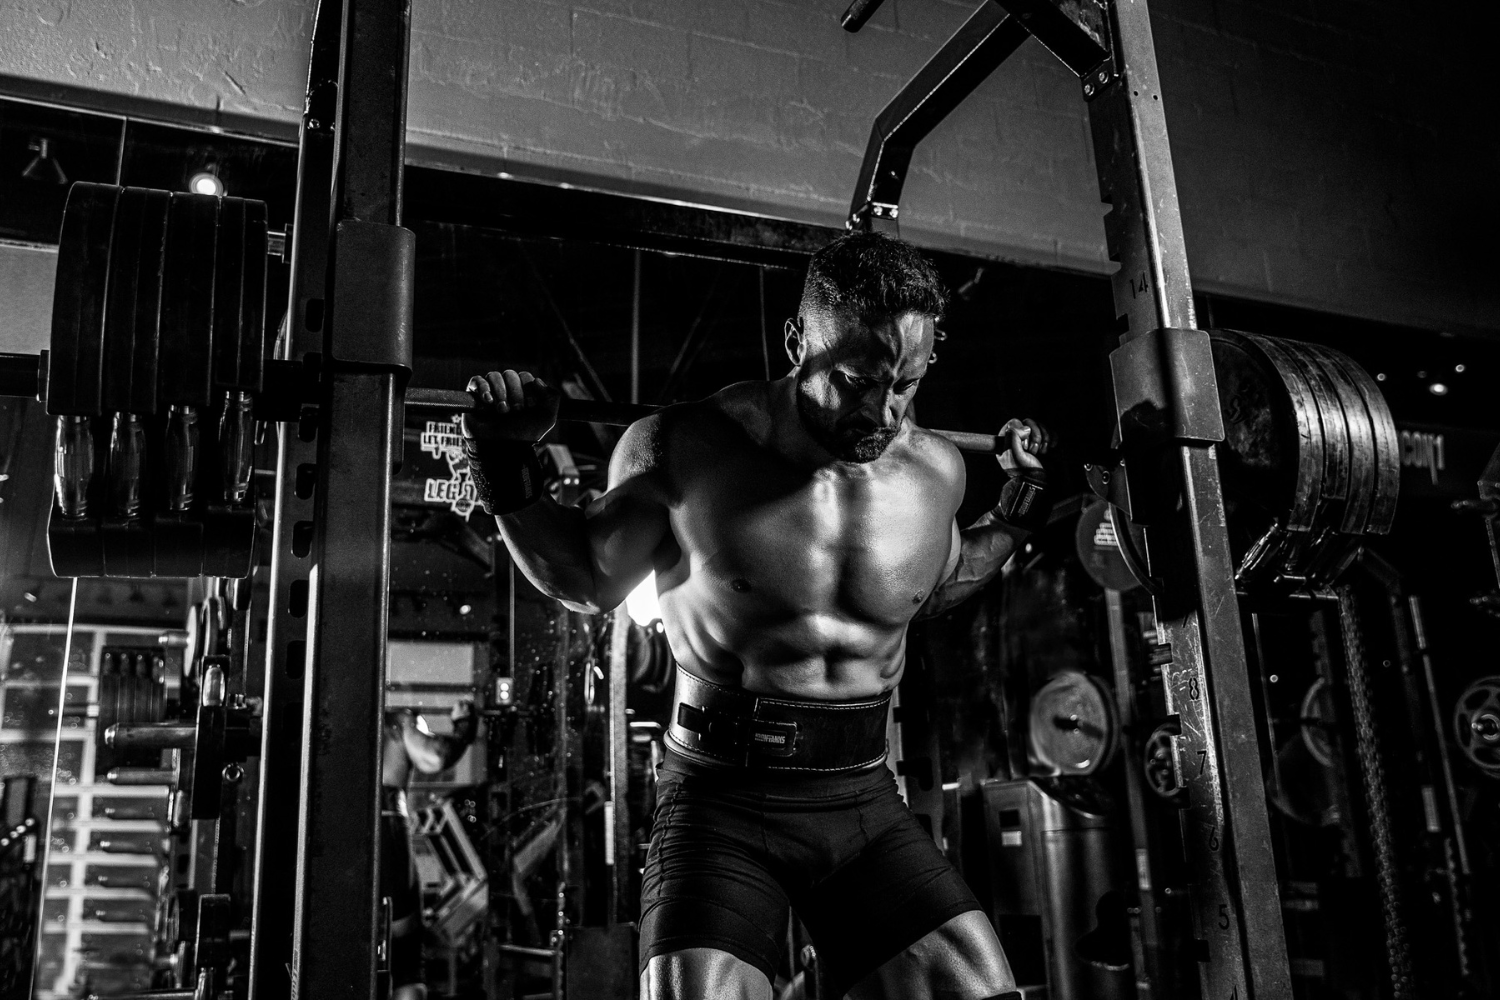 The 6-Week, High-frequency Training Program to Build More Muscle